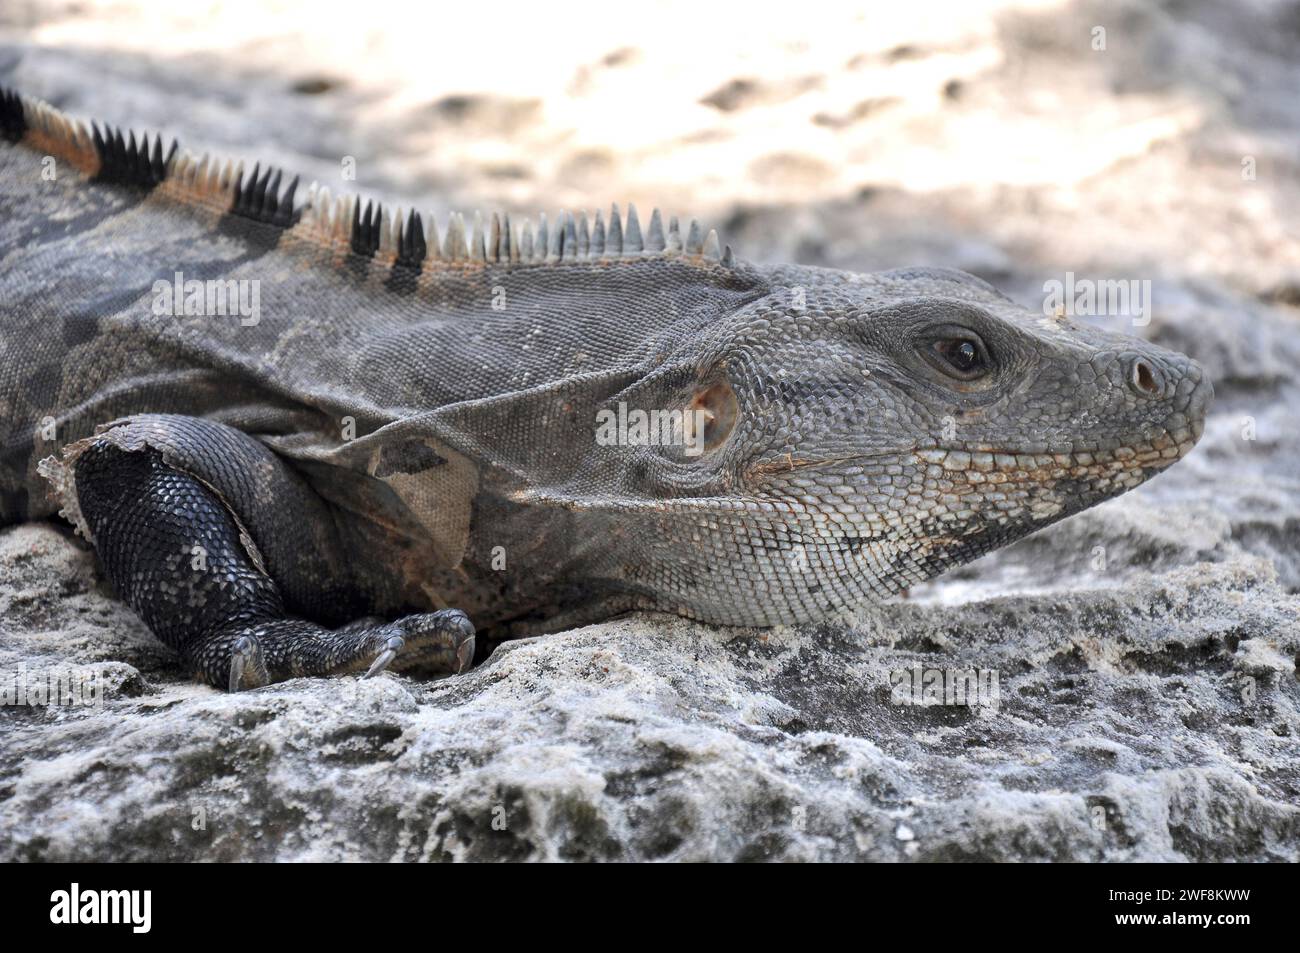 Black iguana or black spiny-tailed iguana (Ctenosaura similis) is a lizard native to Mexico and Central America. This photo was taken in Tulum, Mexico Stock Photo